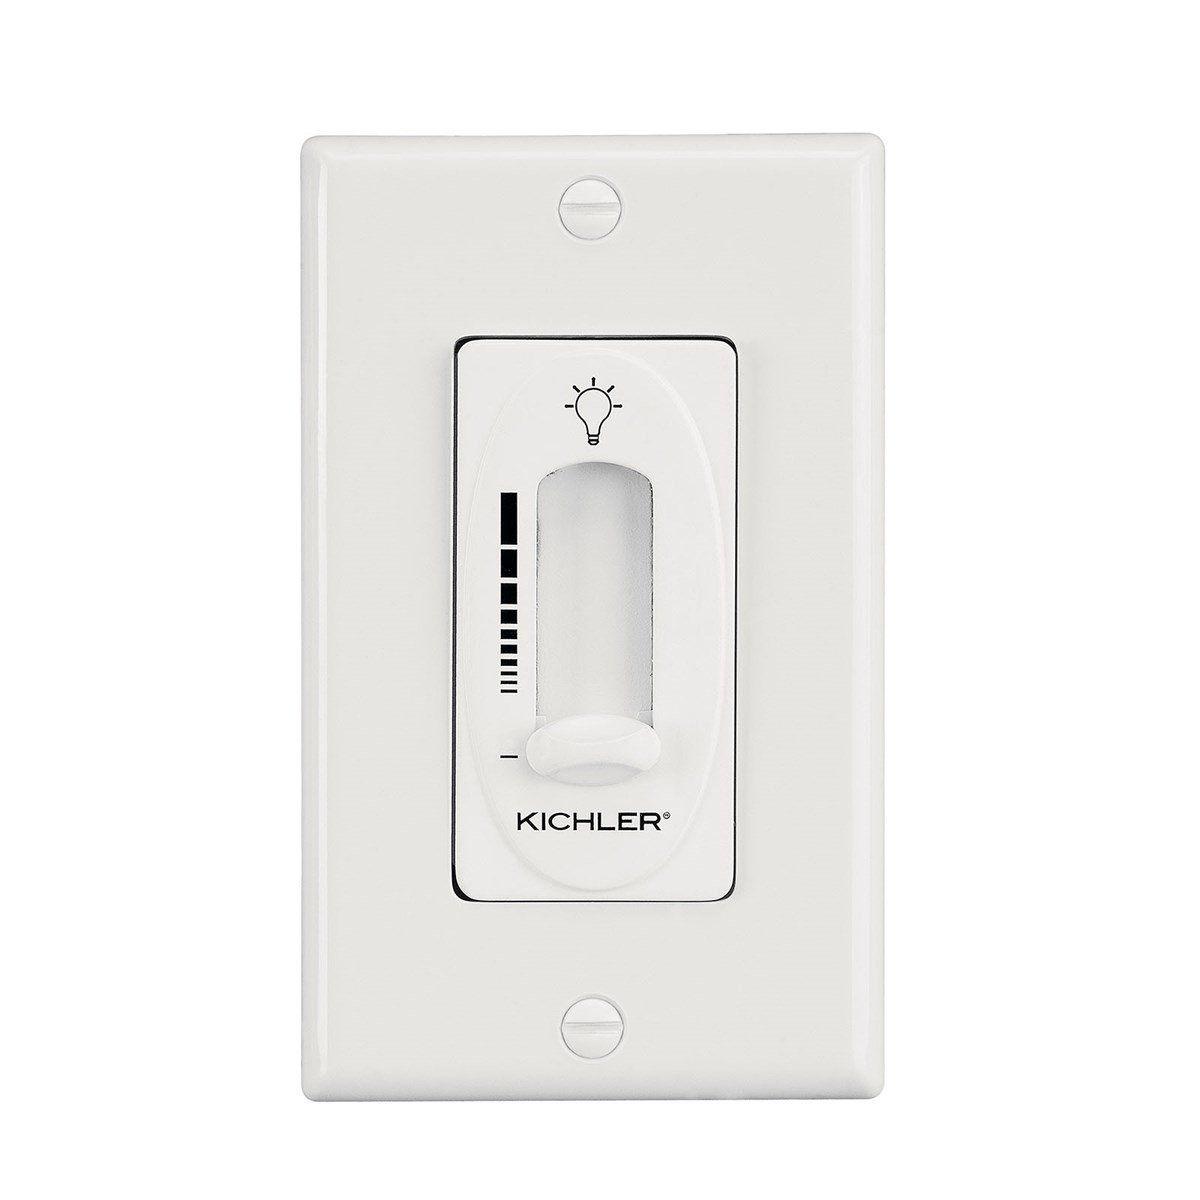 Independence Ceiling Fan Light Dimmer Control, White Finish - Bees Lighting